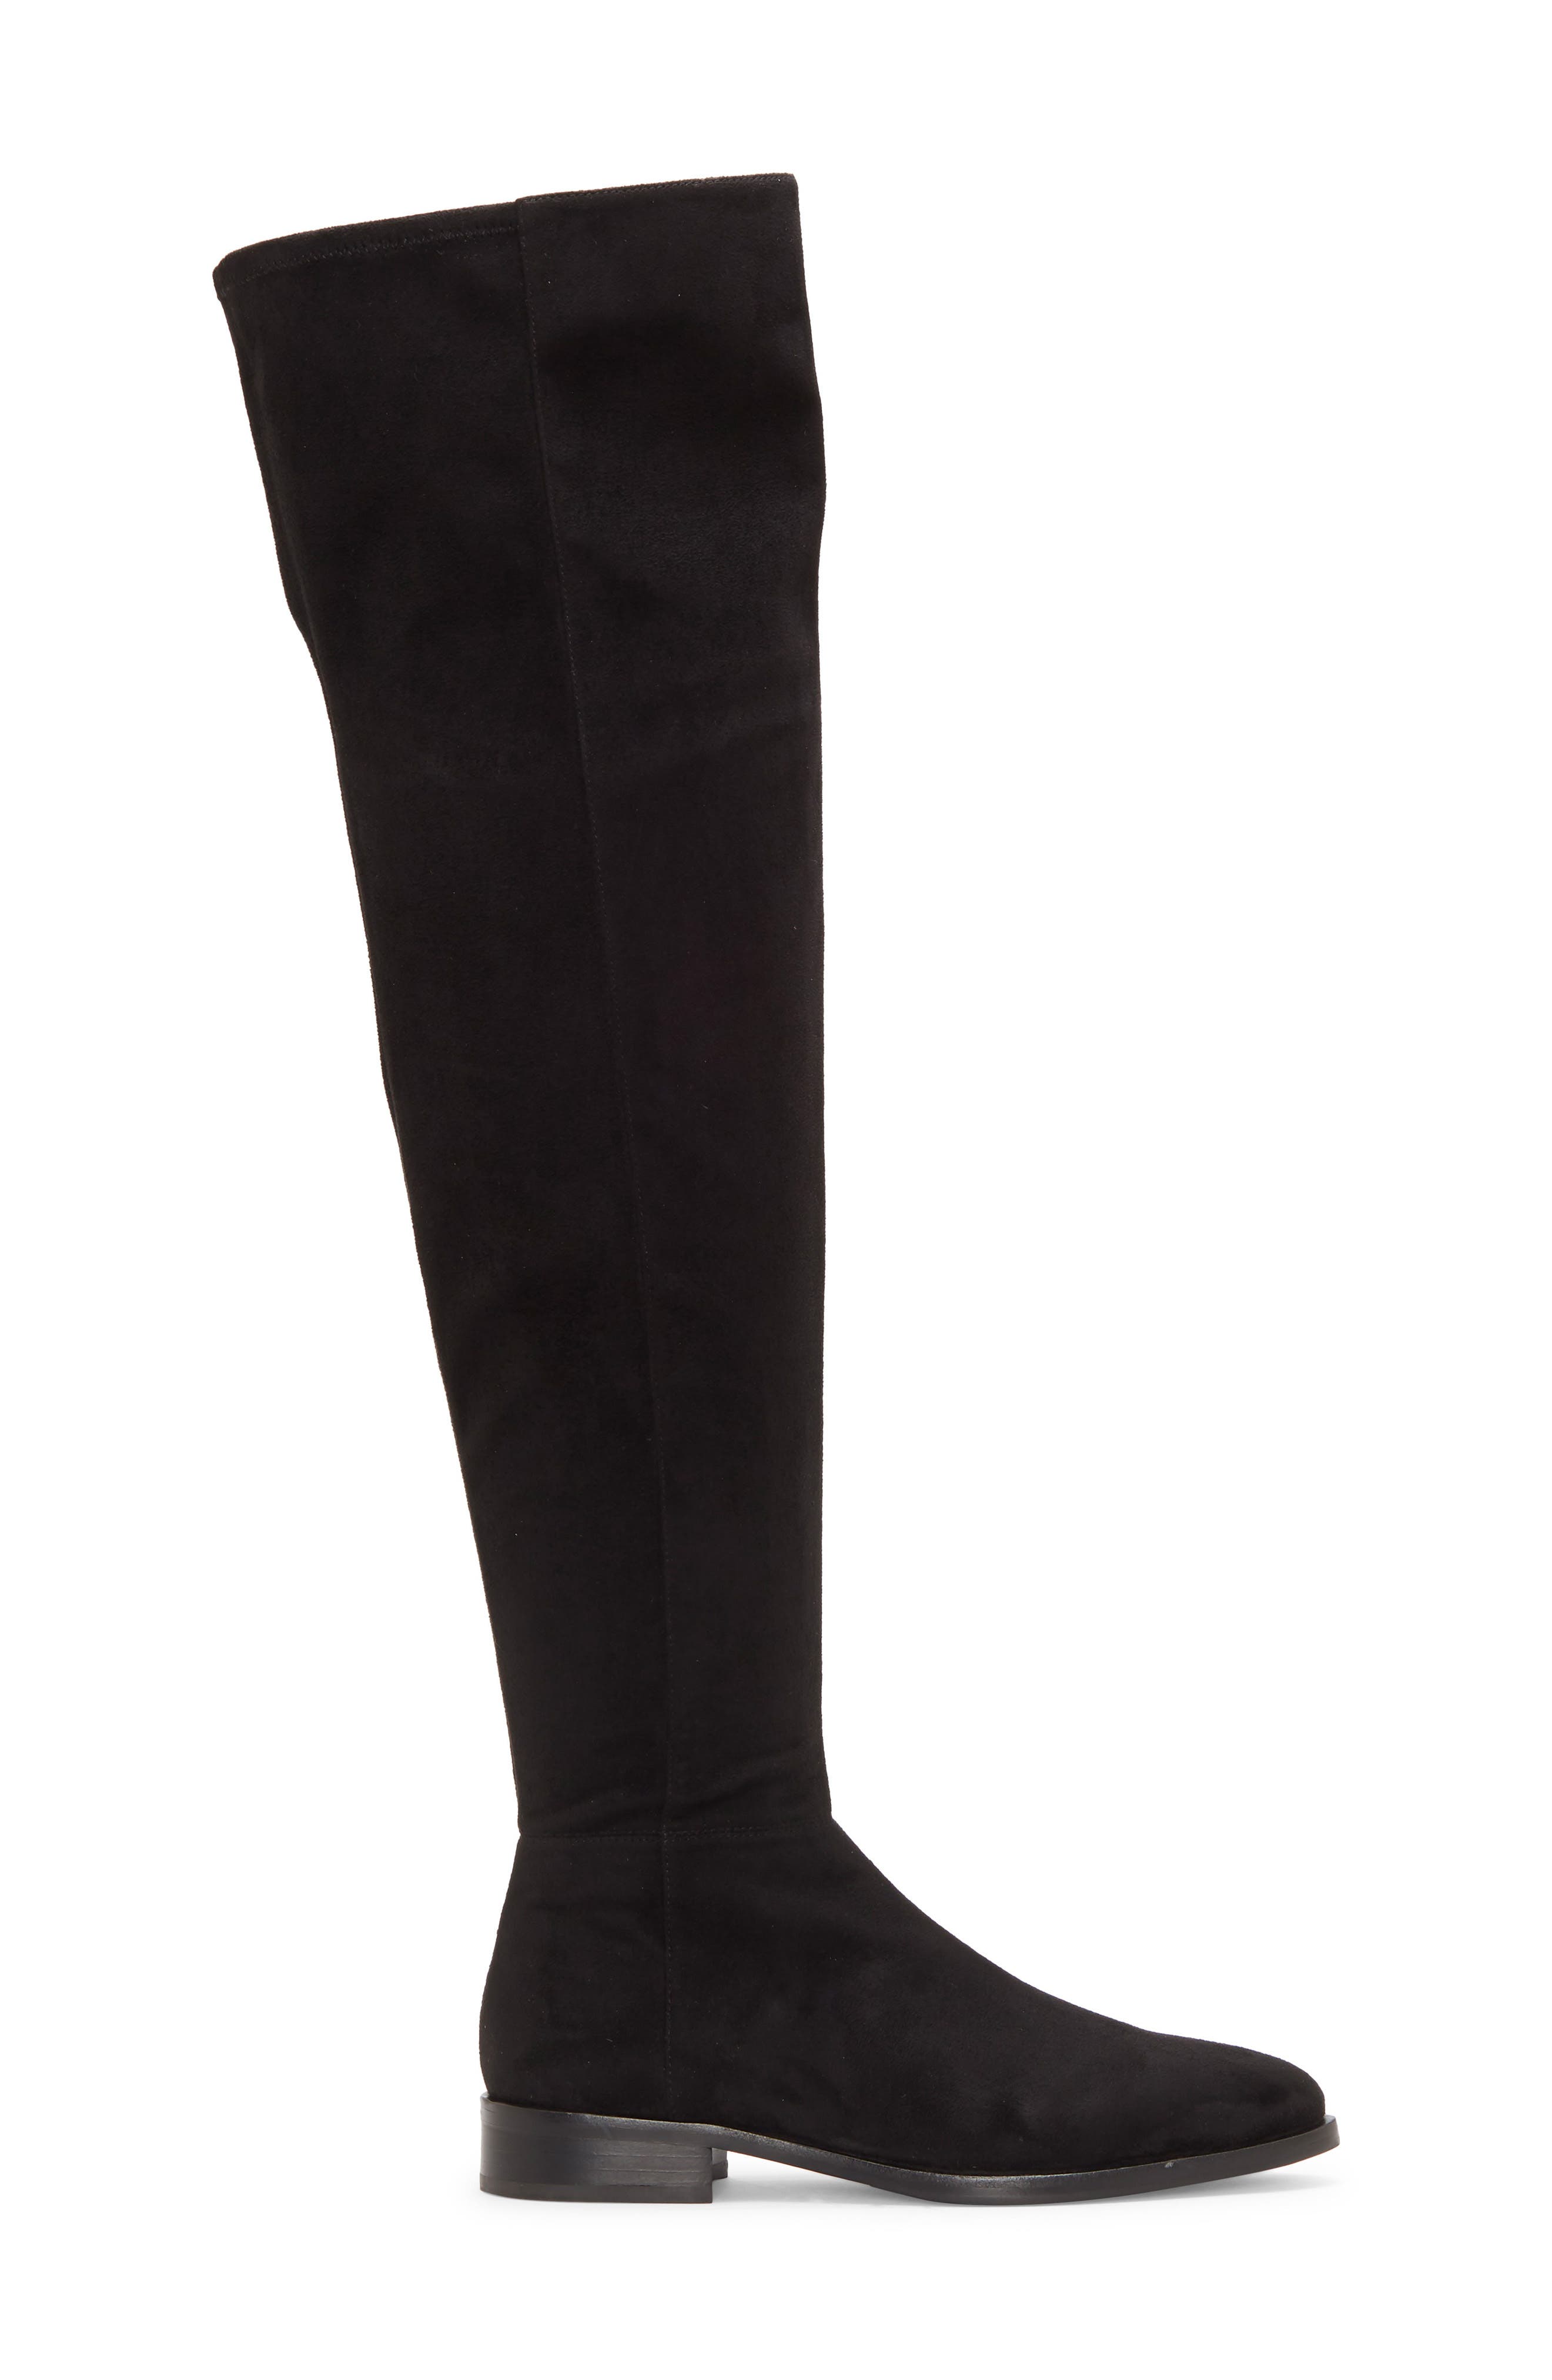 Vince Camuto | Hailie Over the Knee Leather Boot | Nordstrom Rack